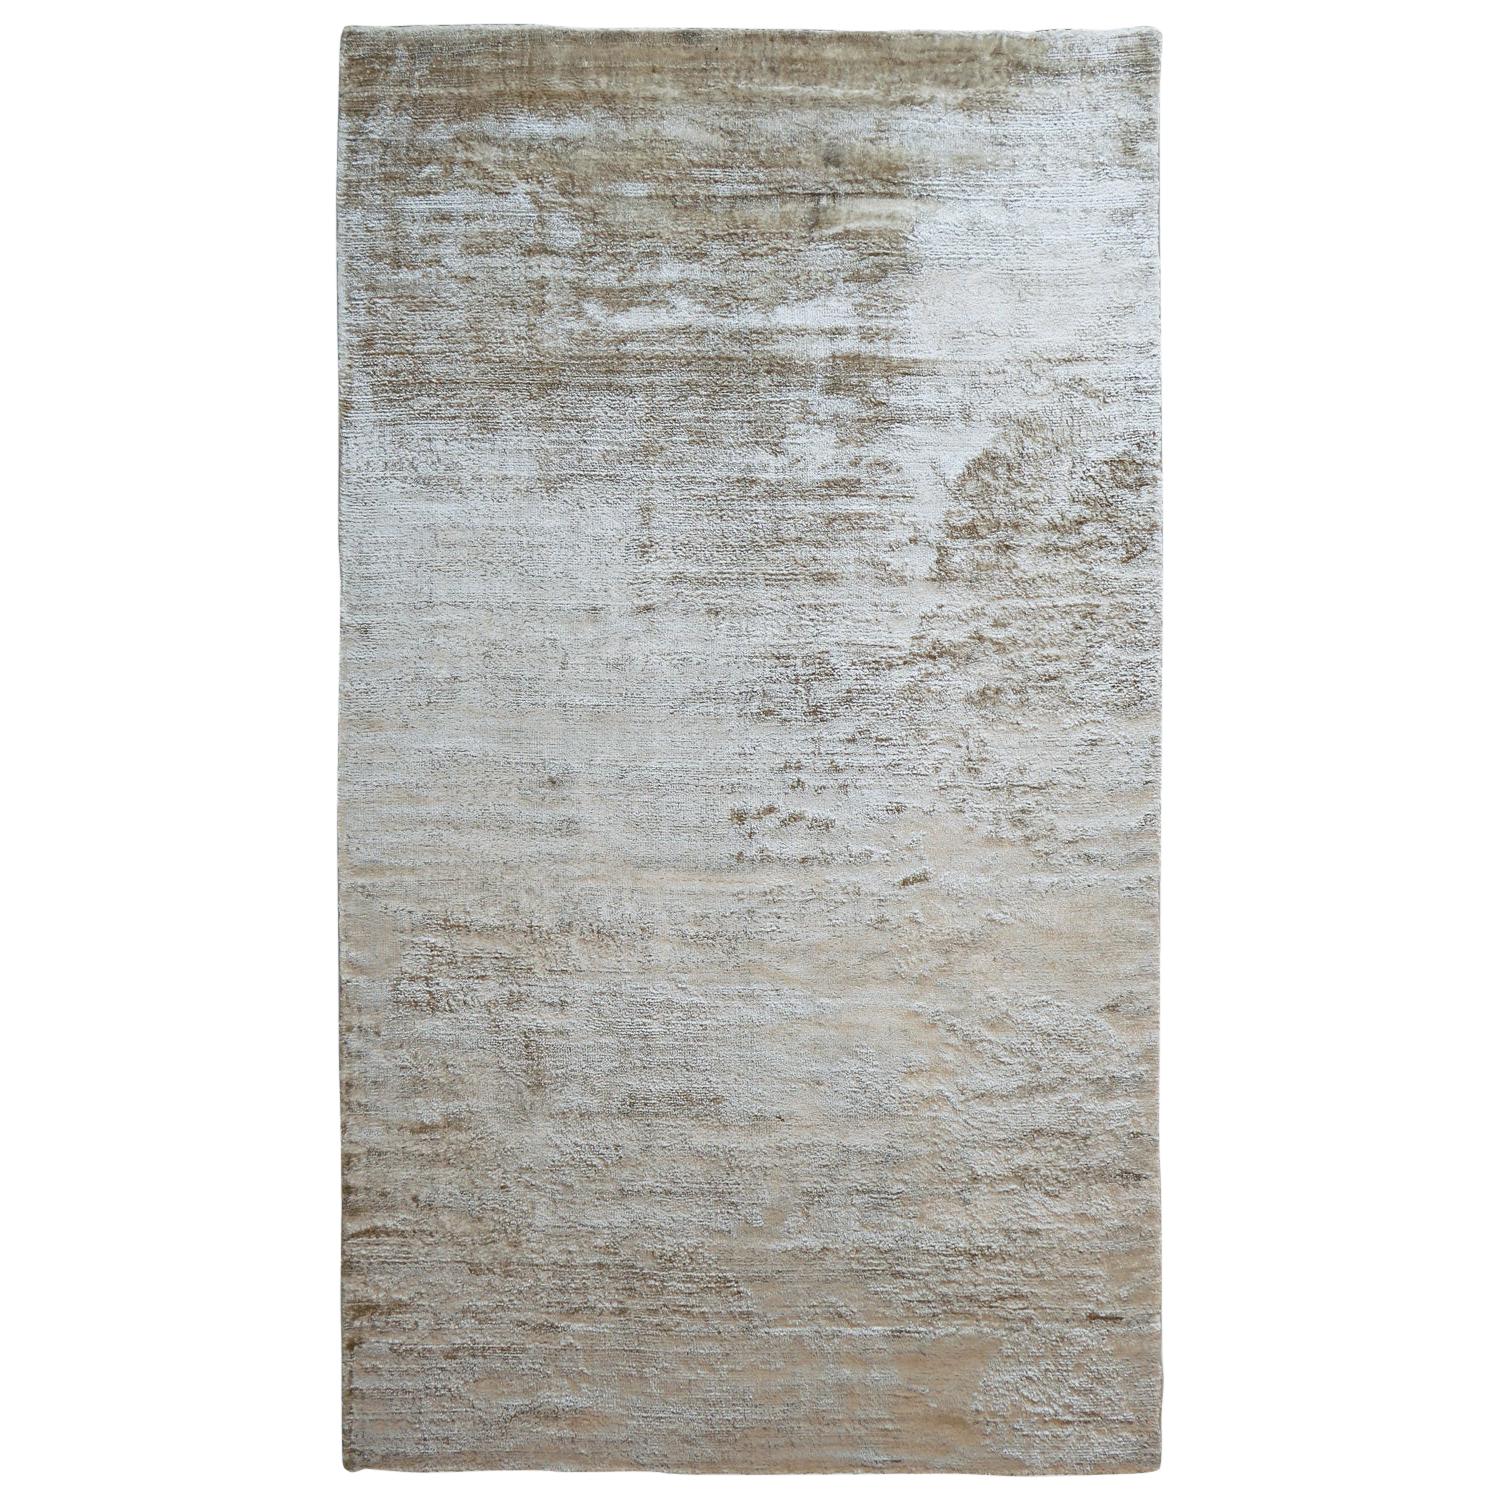 Contemporary Warm Neutral Shiny Soft Rug by Deanna Comellini 200x350 cm For Sale